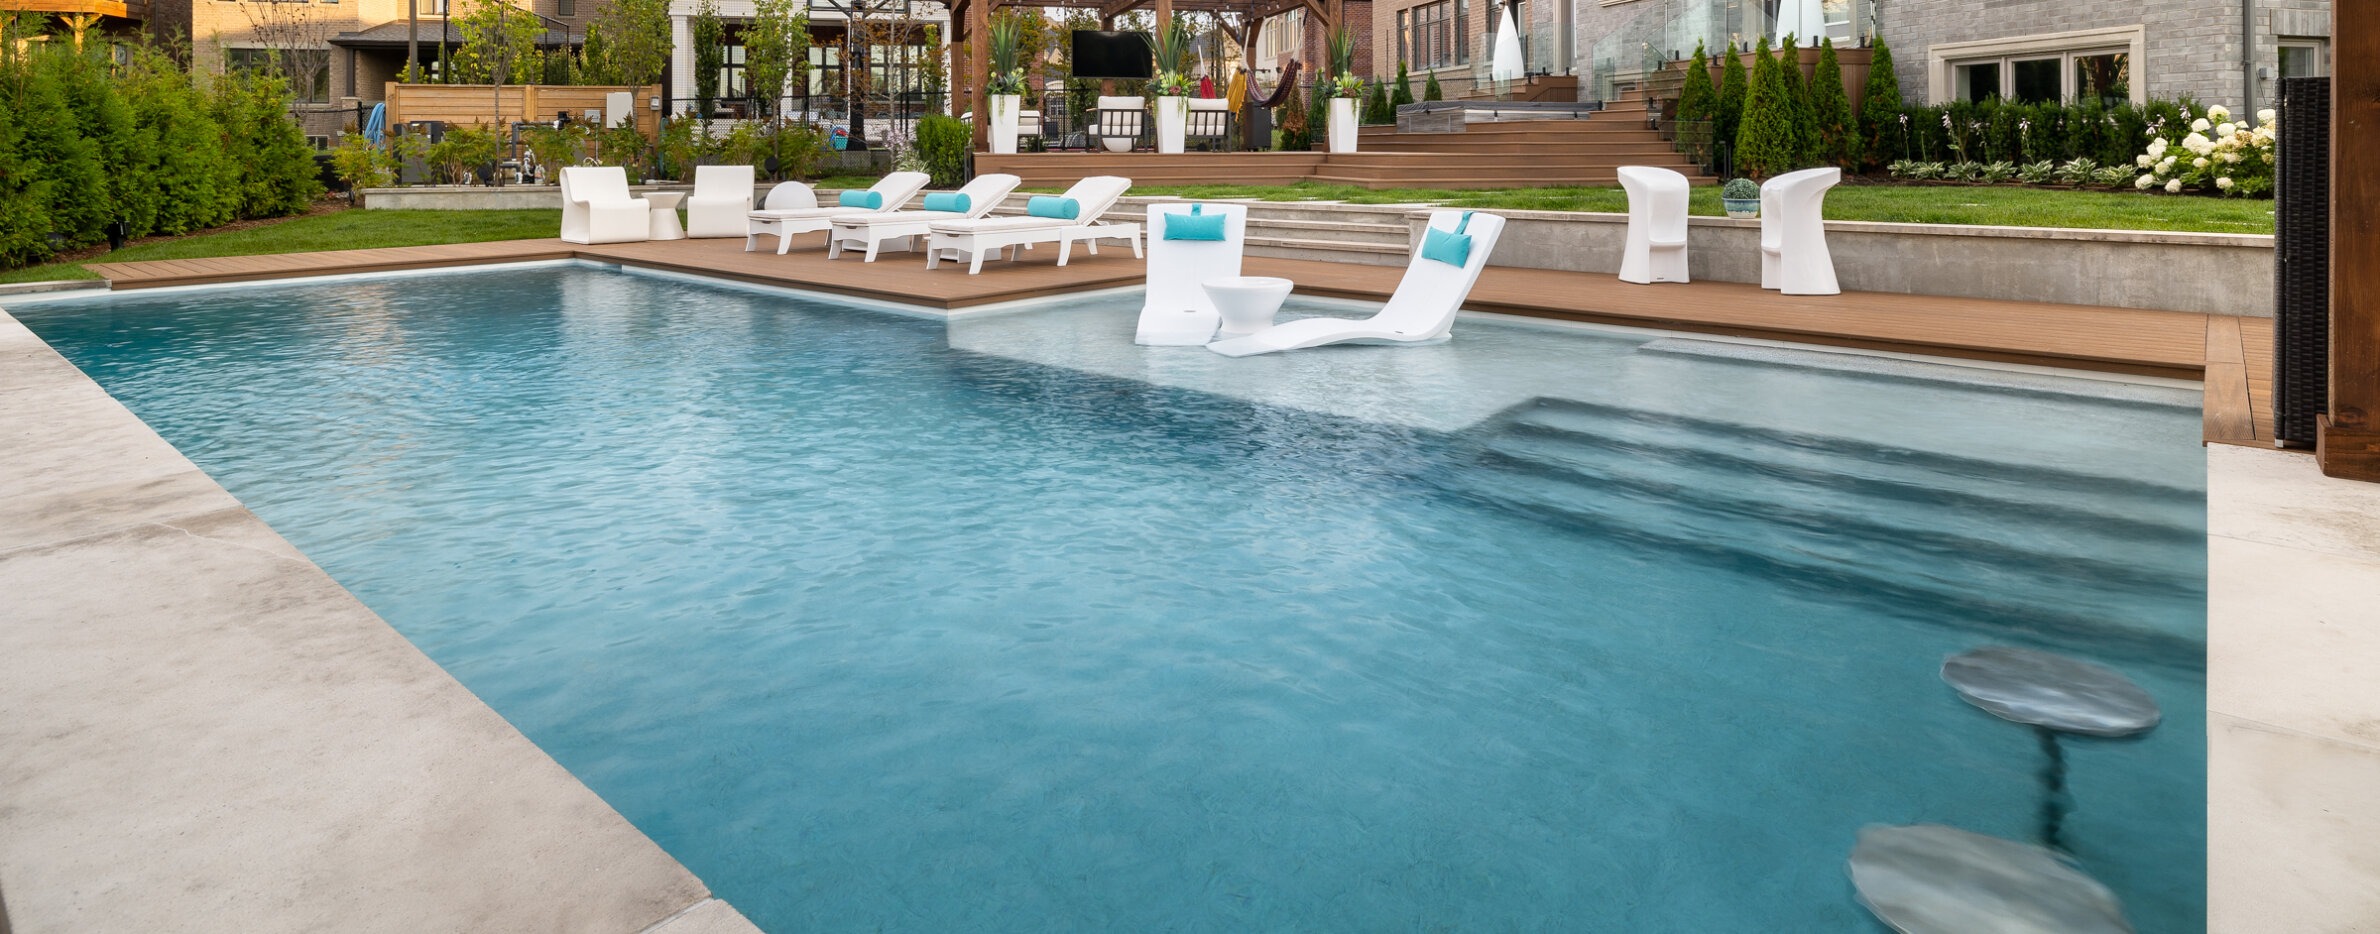 An outdoor swimming pool with crystal clear blue water, surrounded by white lounge chairs, a wooden deck, and a well-manicured lawn in the background.